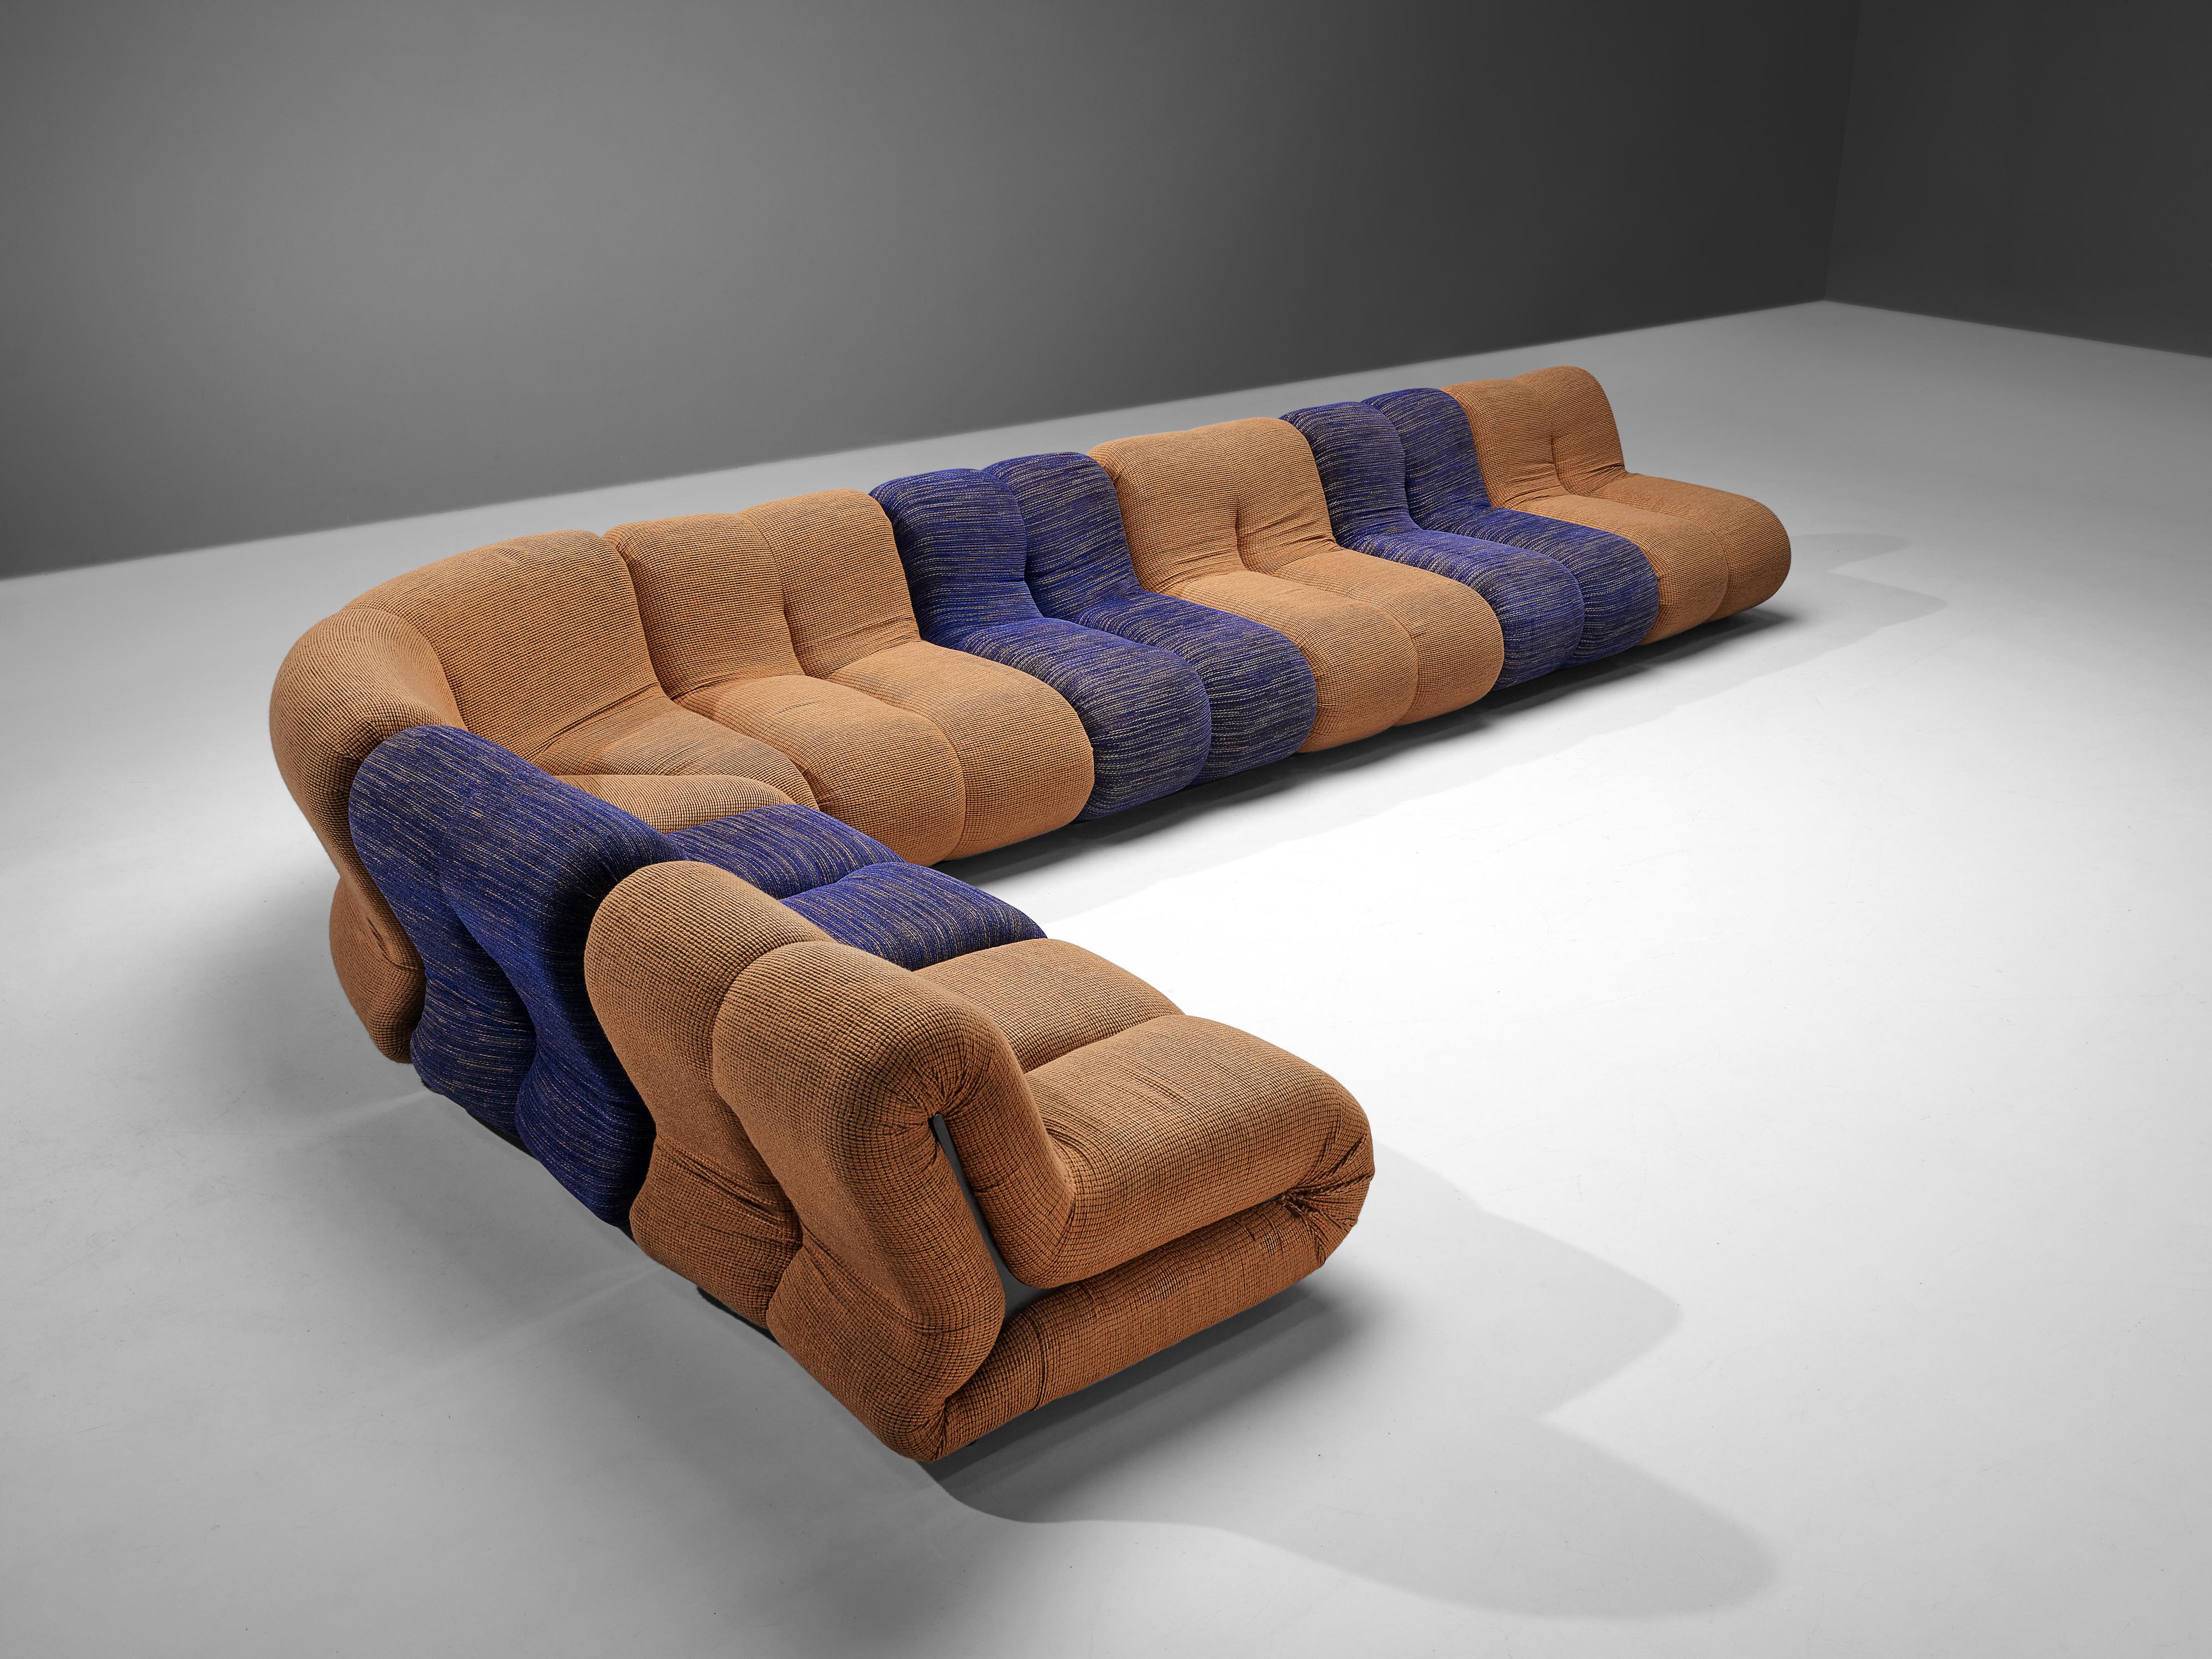 Claudio Vagnoni for 1P, ‘Pagru’ modular sofa, blue and brown fabric upholstery, Italy, 1968 

Striking ‘Pagru’ modular sofa designed in Italy by Claudio Vagnoni, manufactured by 1P in 1969. Each seating elements consists of two L-shaped forms that